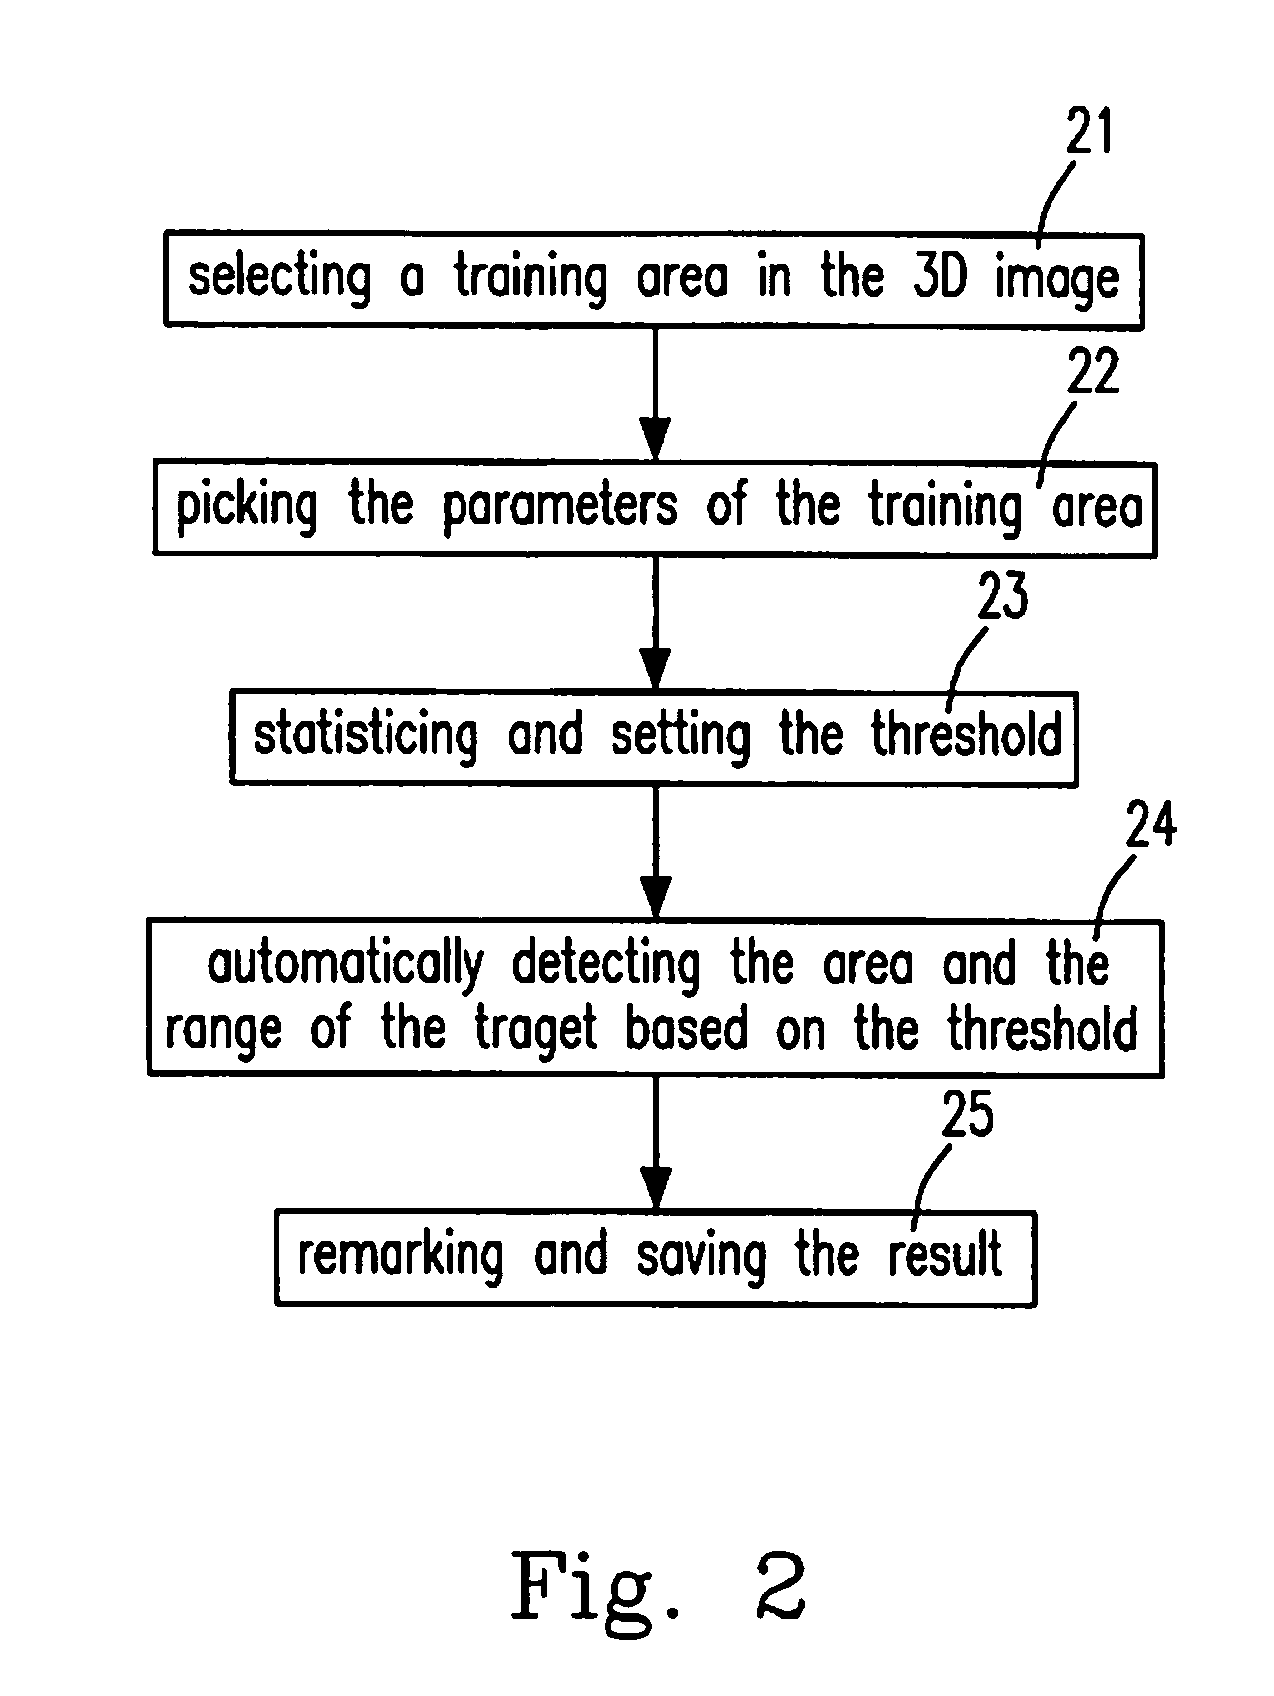 Target detecting, editing and rebuilding method and system by 3D image